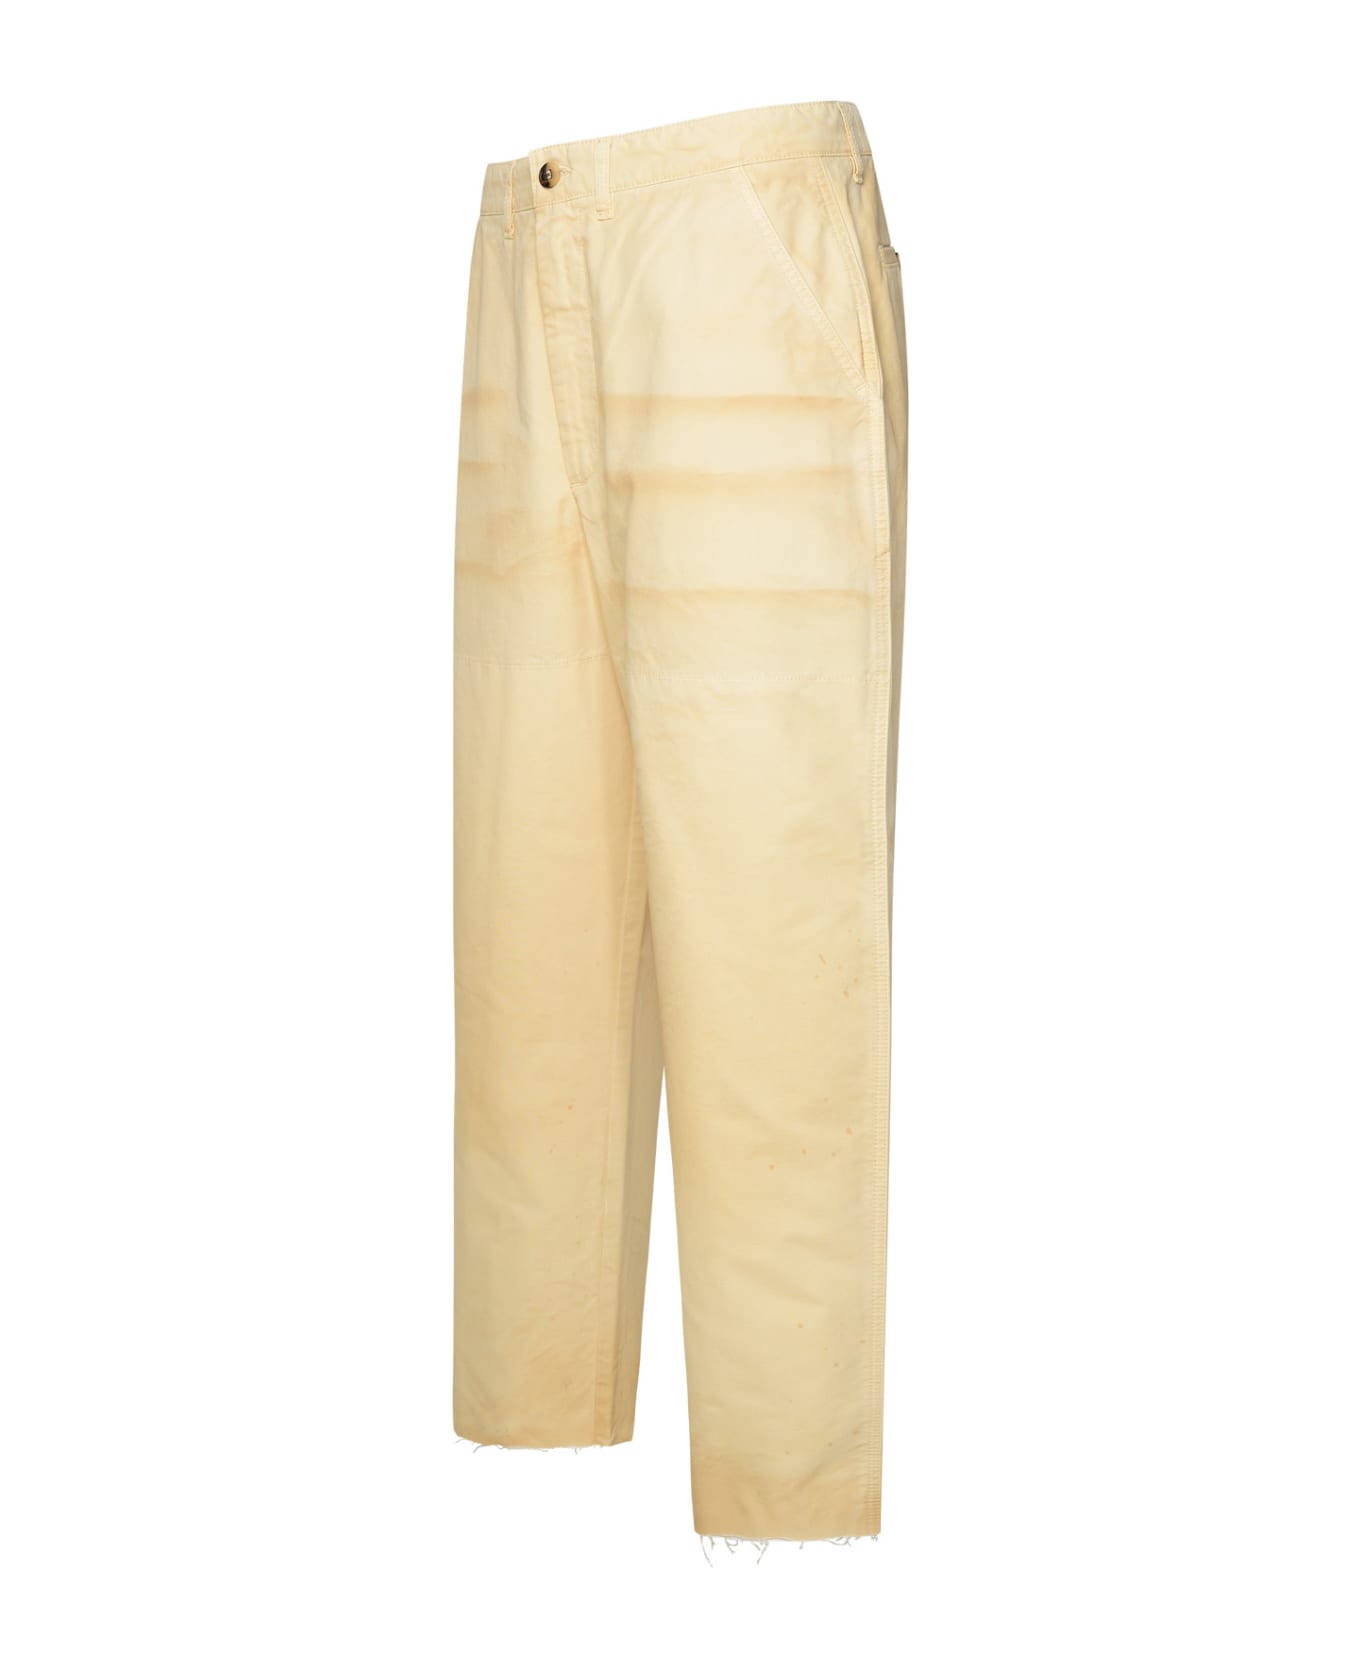 Golden Goose Cotton Trousers - Beige ボトムス